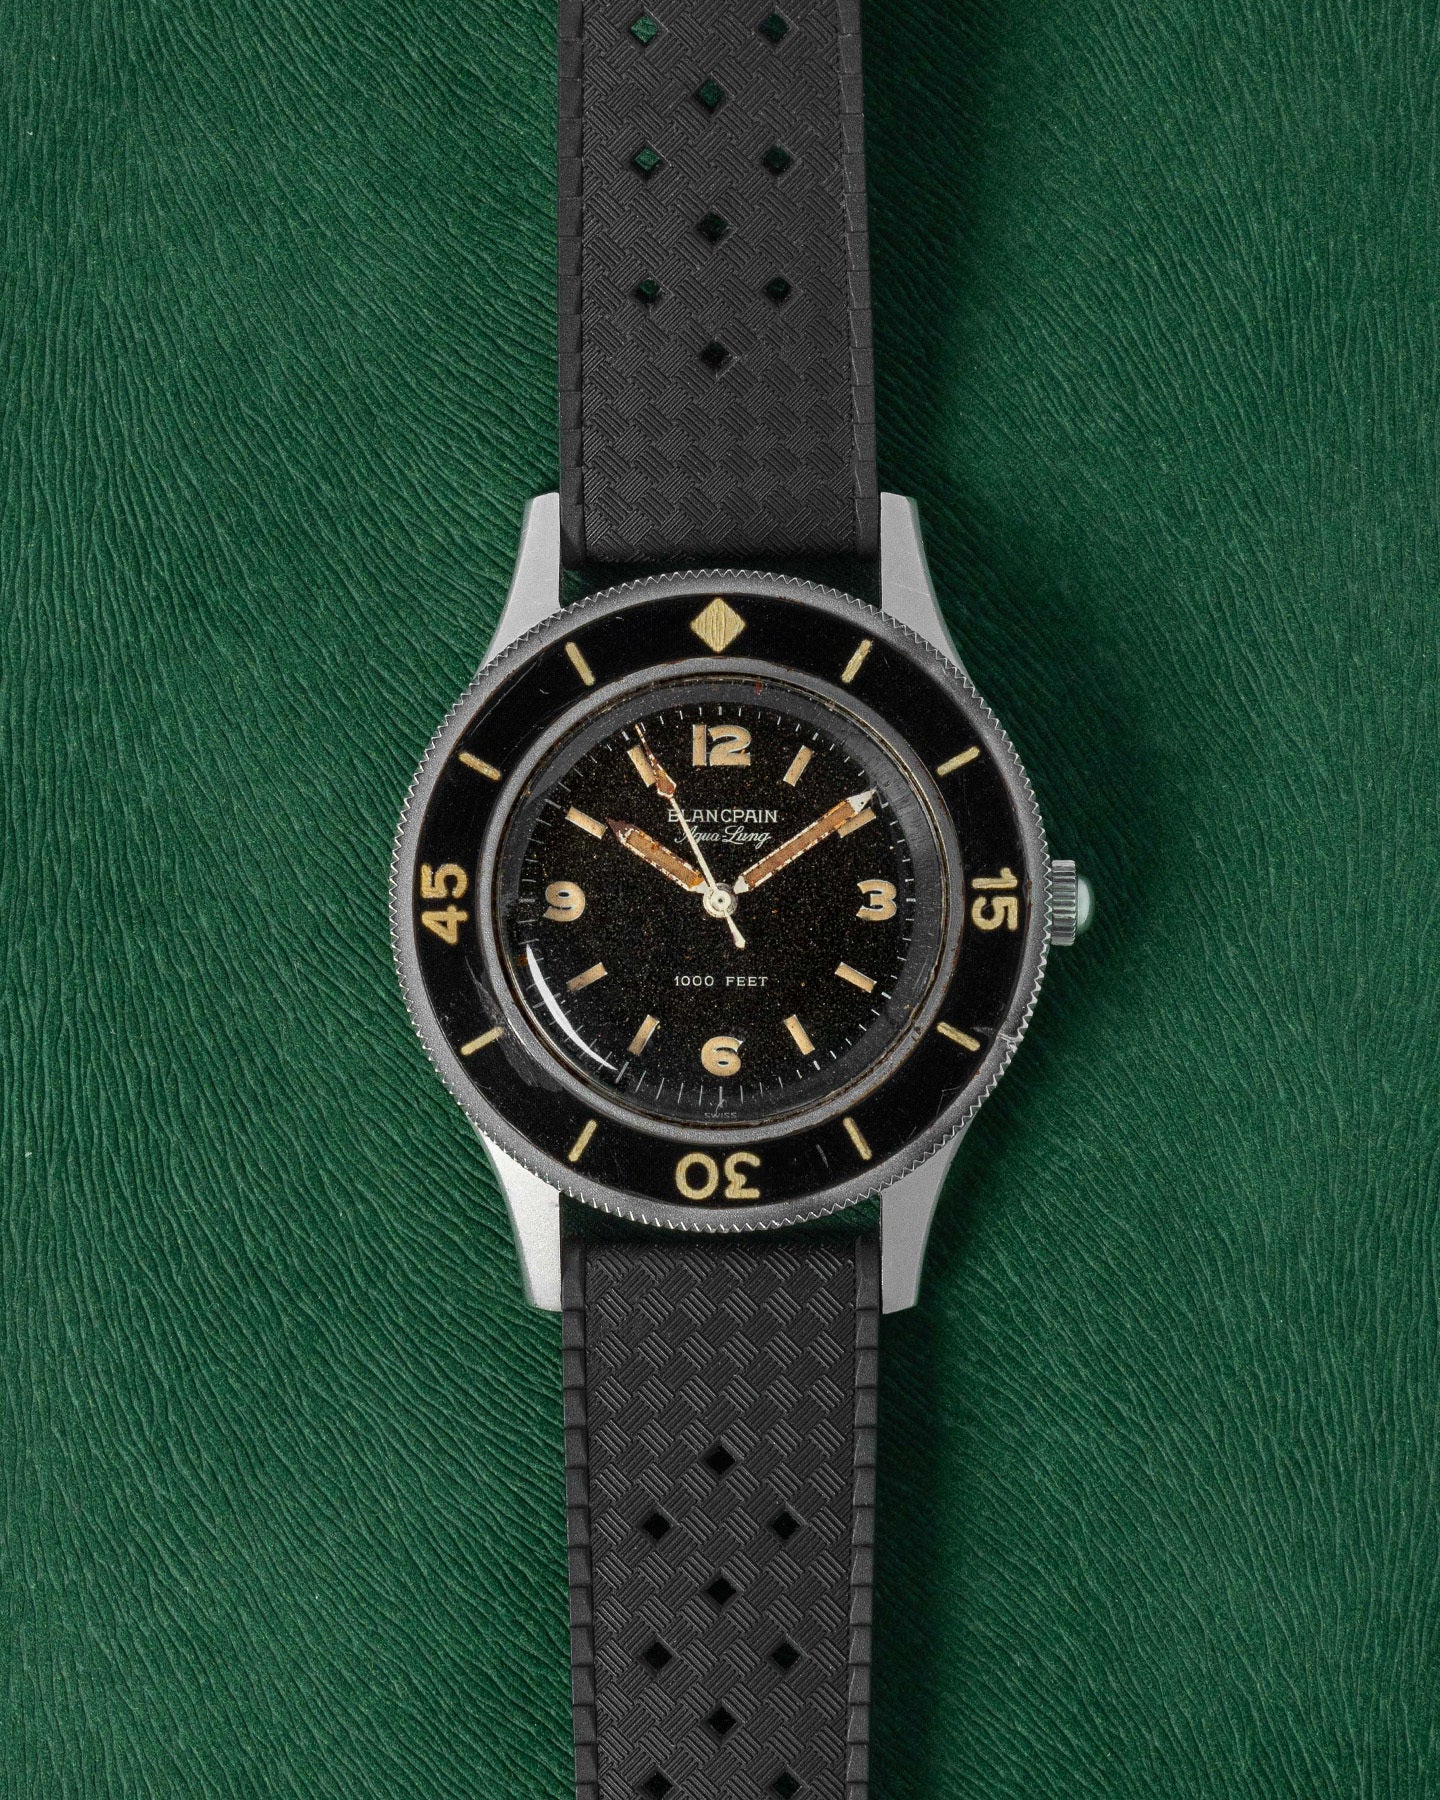 Blancpain Vintage Fifty Fathoms Aqualung 1000FT 